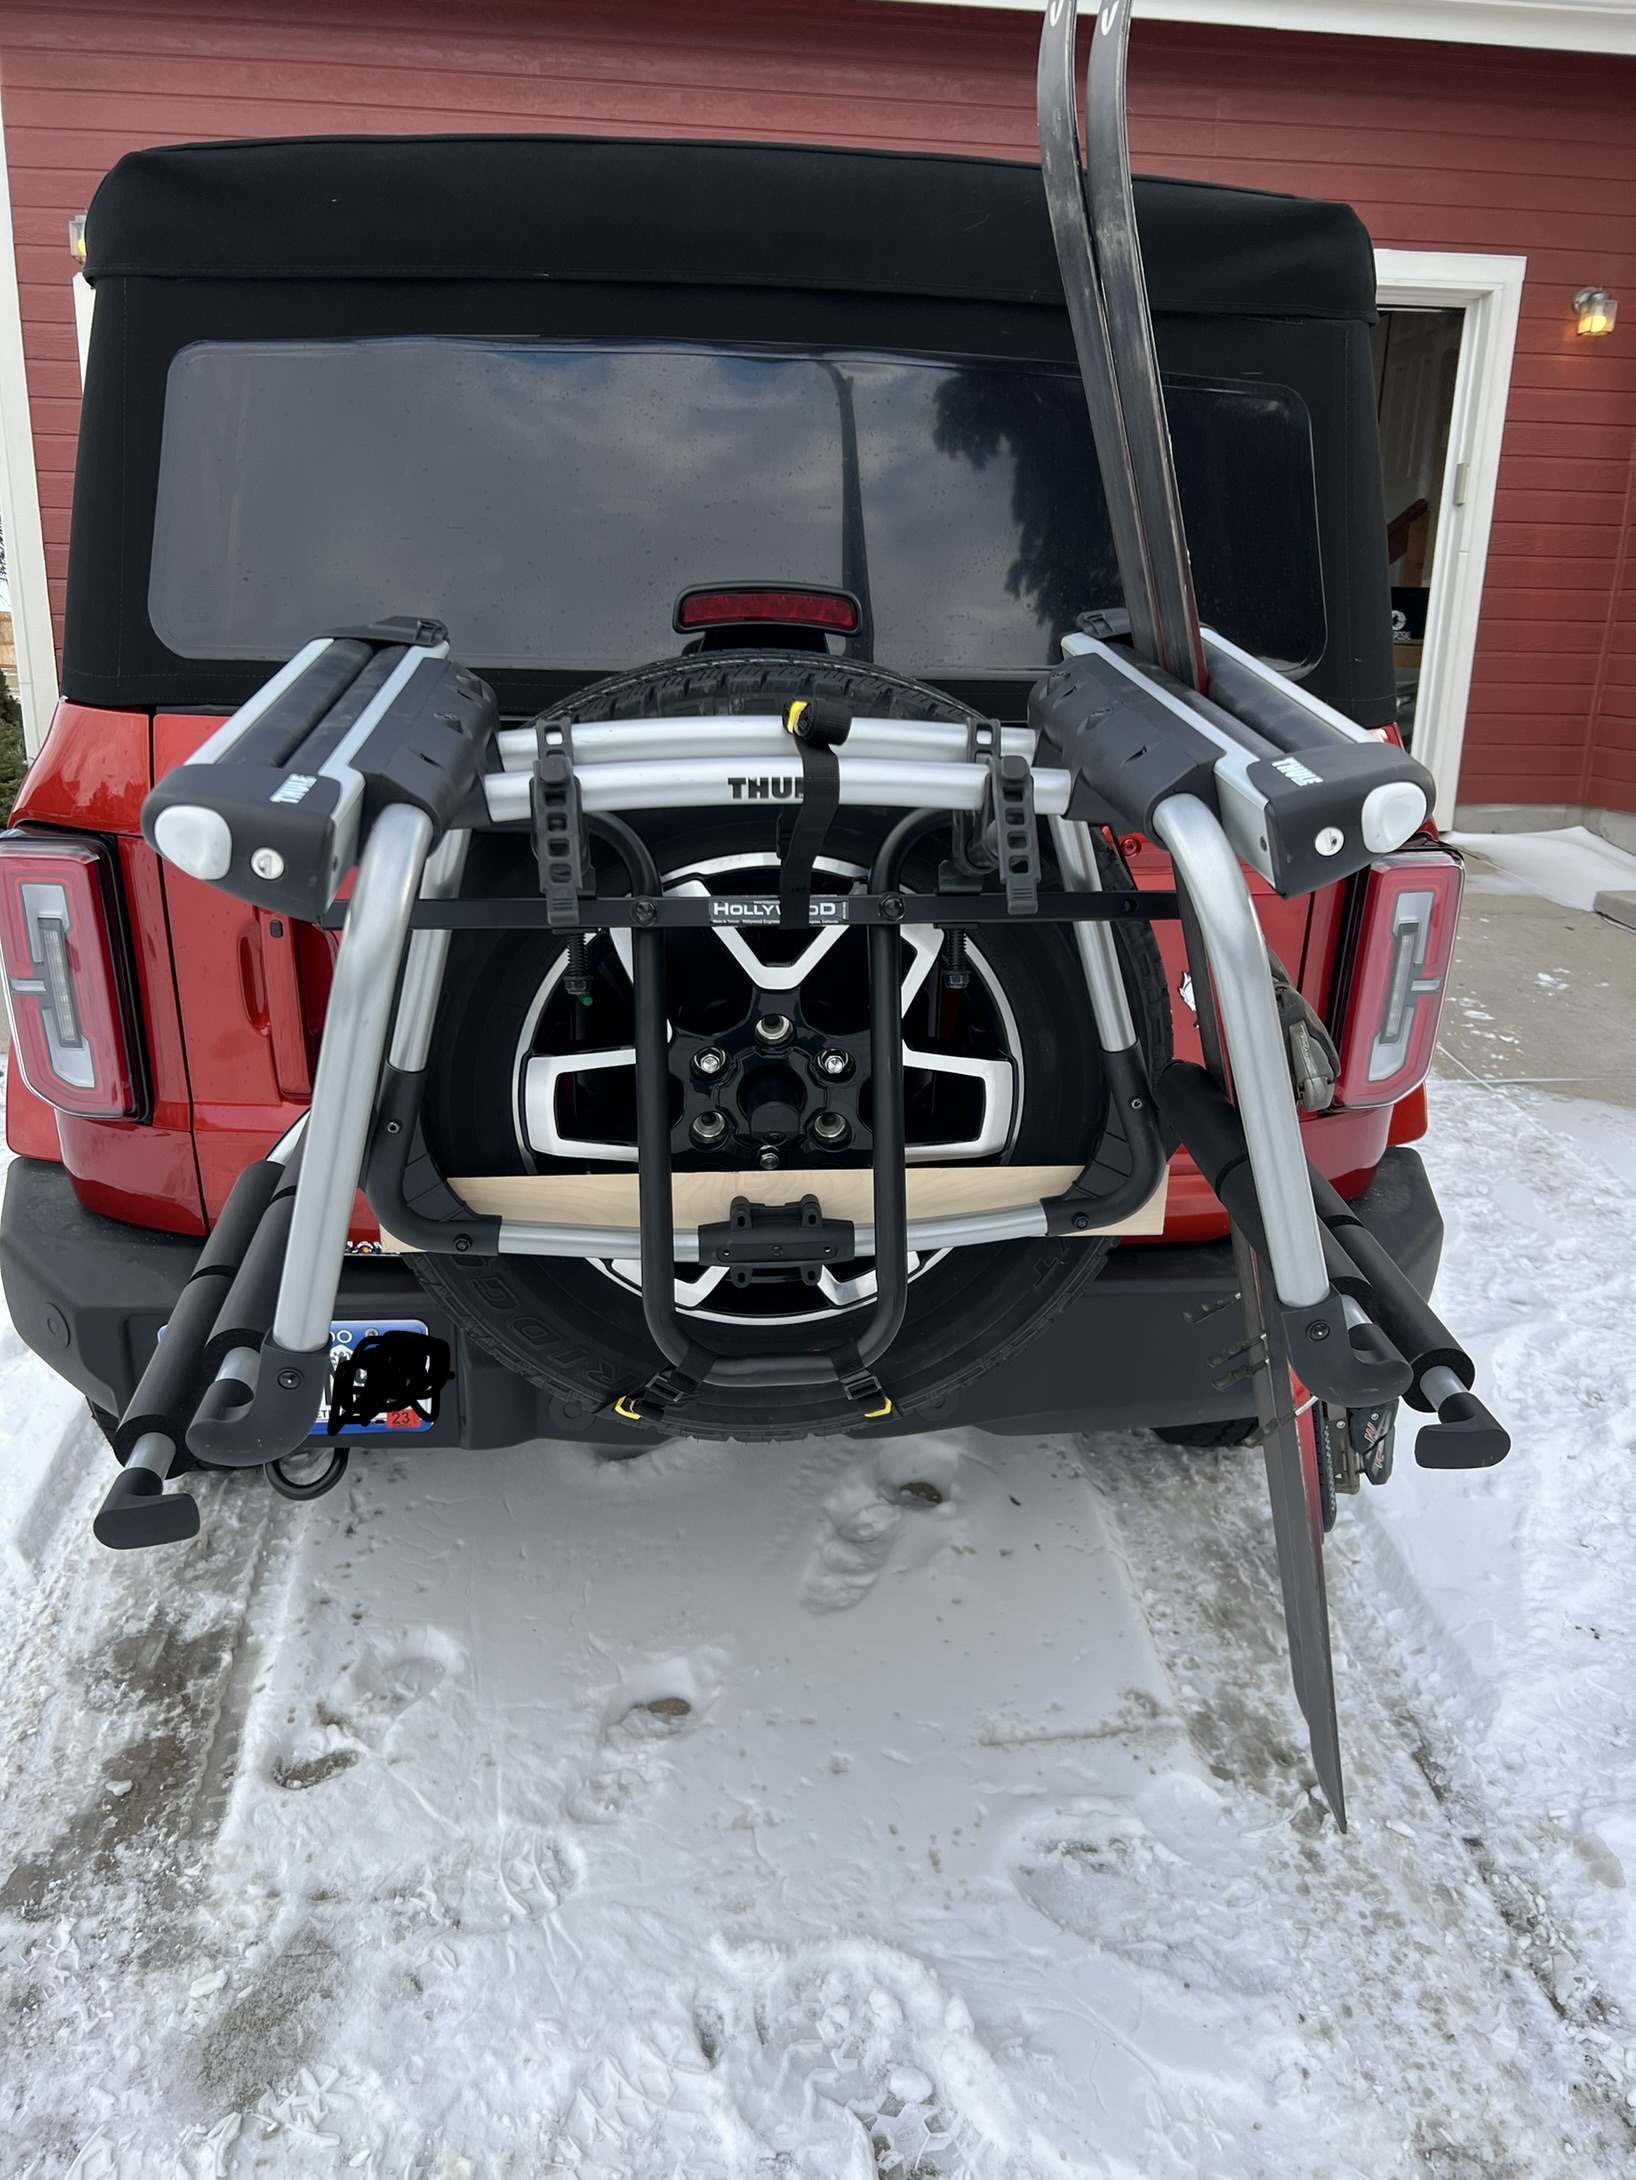 Ford Bronco Solution for Bike/Ski rack for soft tops without a hitch 36D09467-72EB-4DCF-99F6-0715D44C08DF_1_201_a